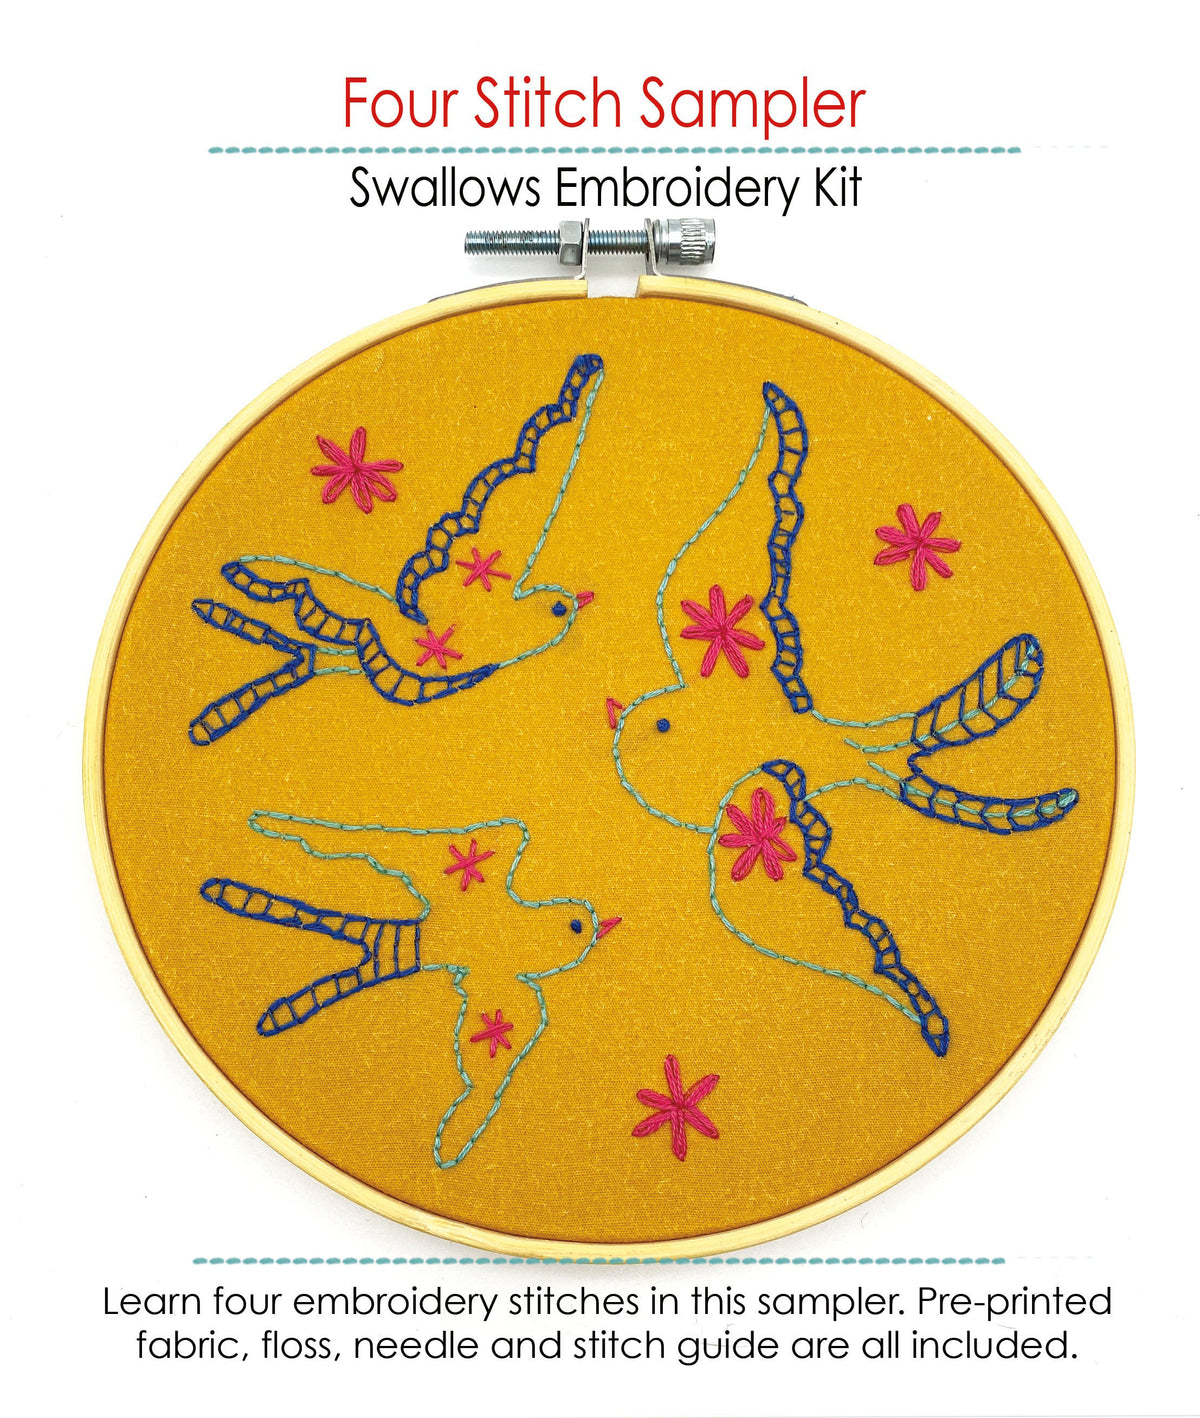 Four Stitch Hand Embroidery Sampler Kit - Swallows